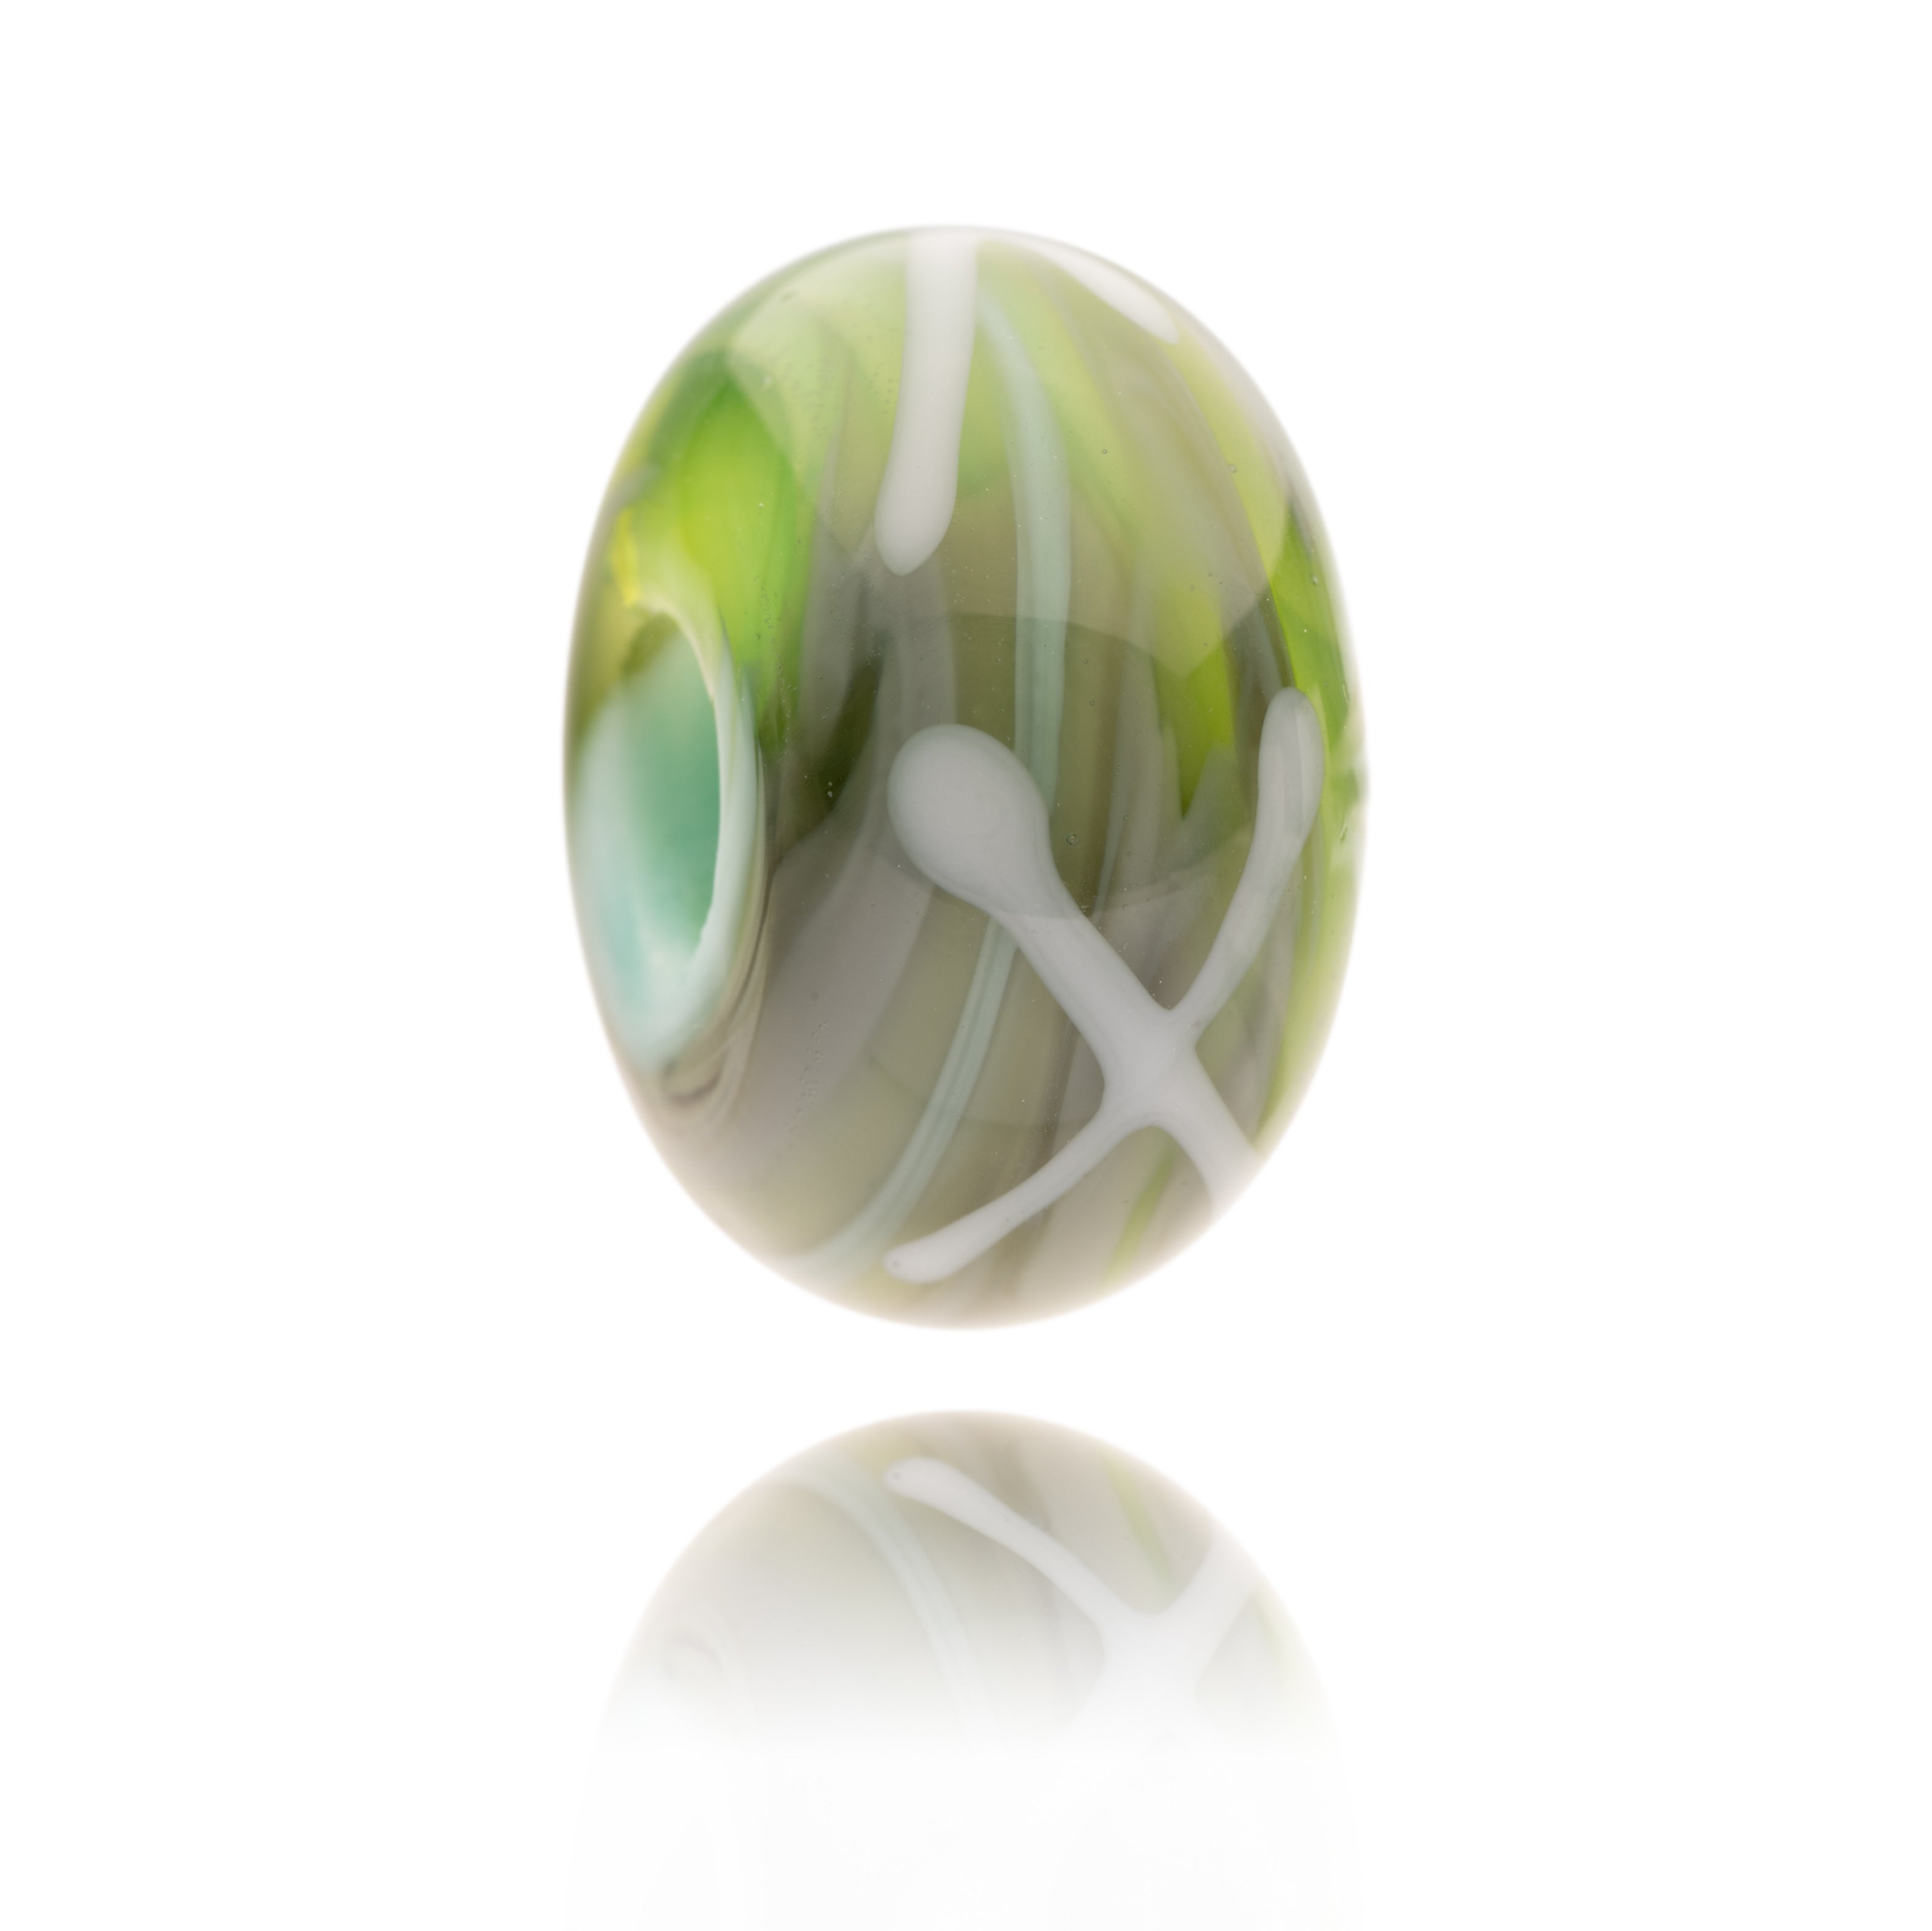 The Broads National Park Bead